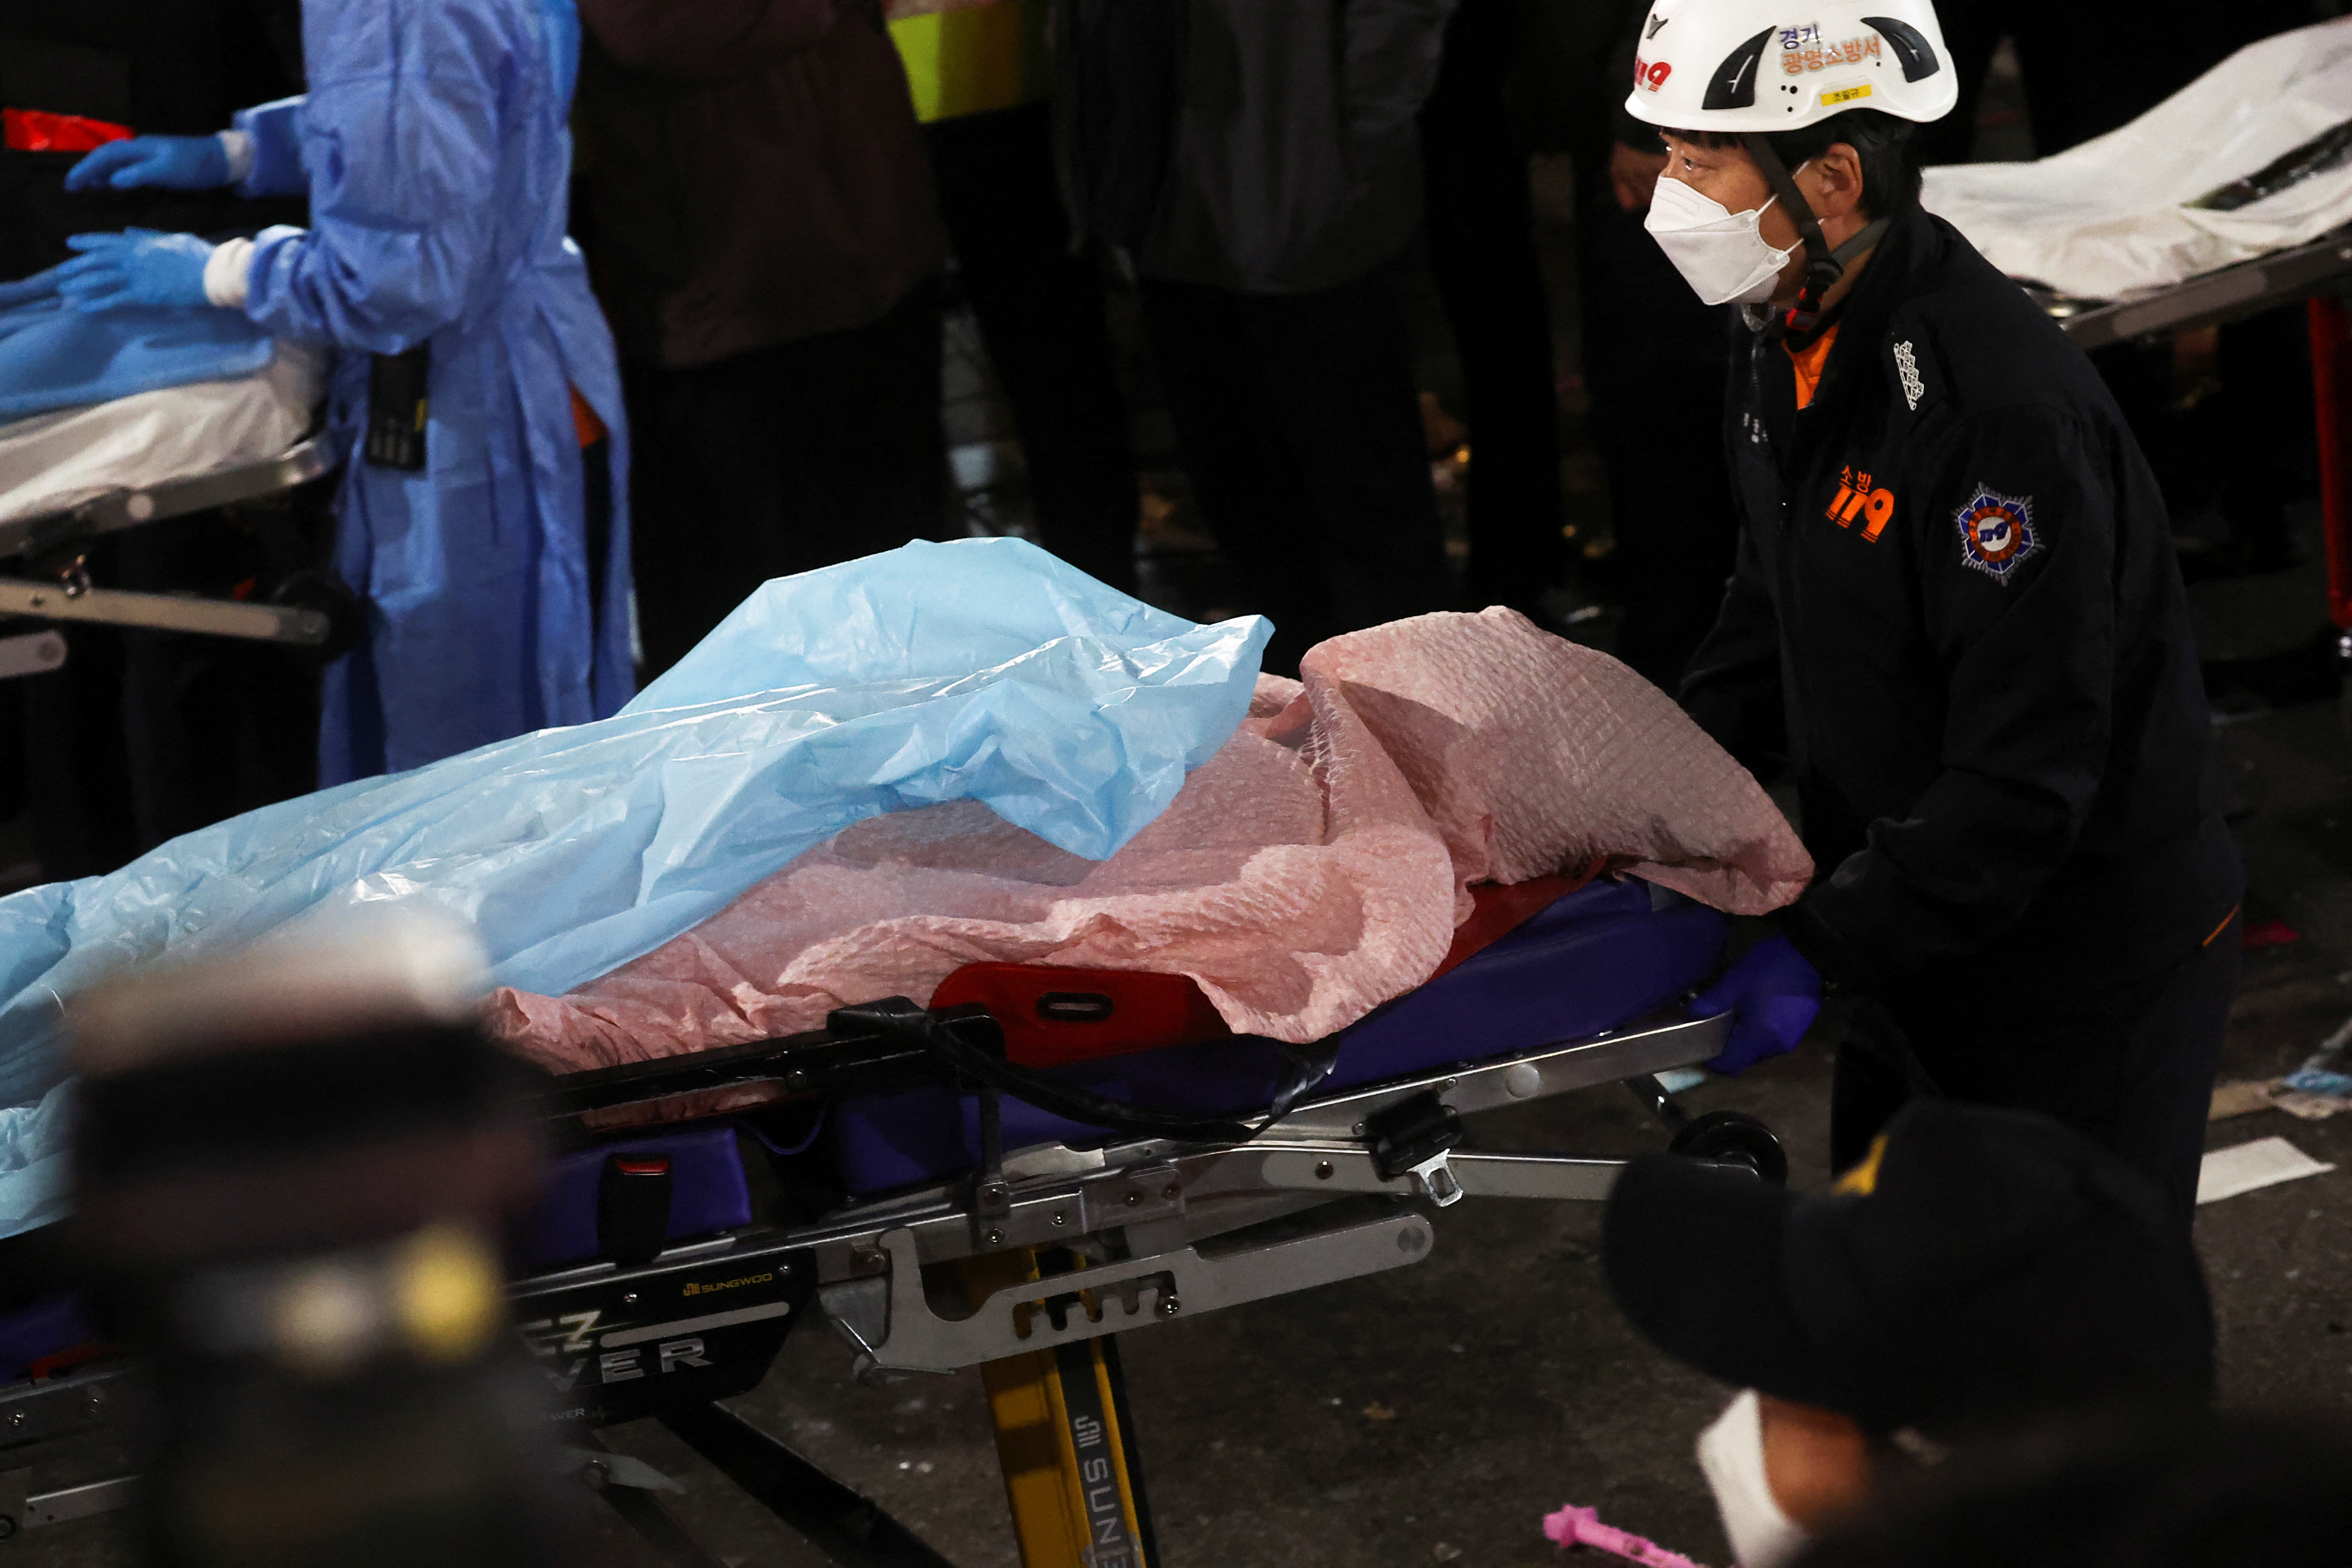   Emergency workers and pedestrians were also seen performing CPR on people lying in the streets.